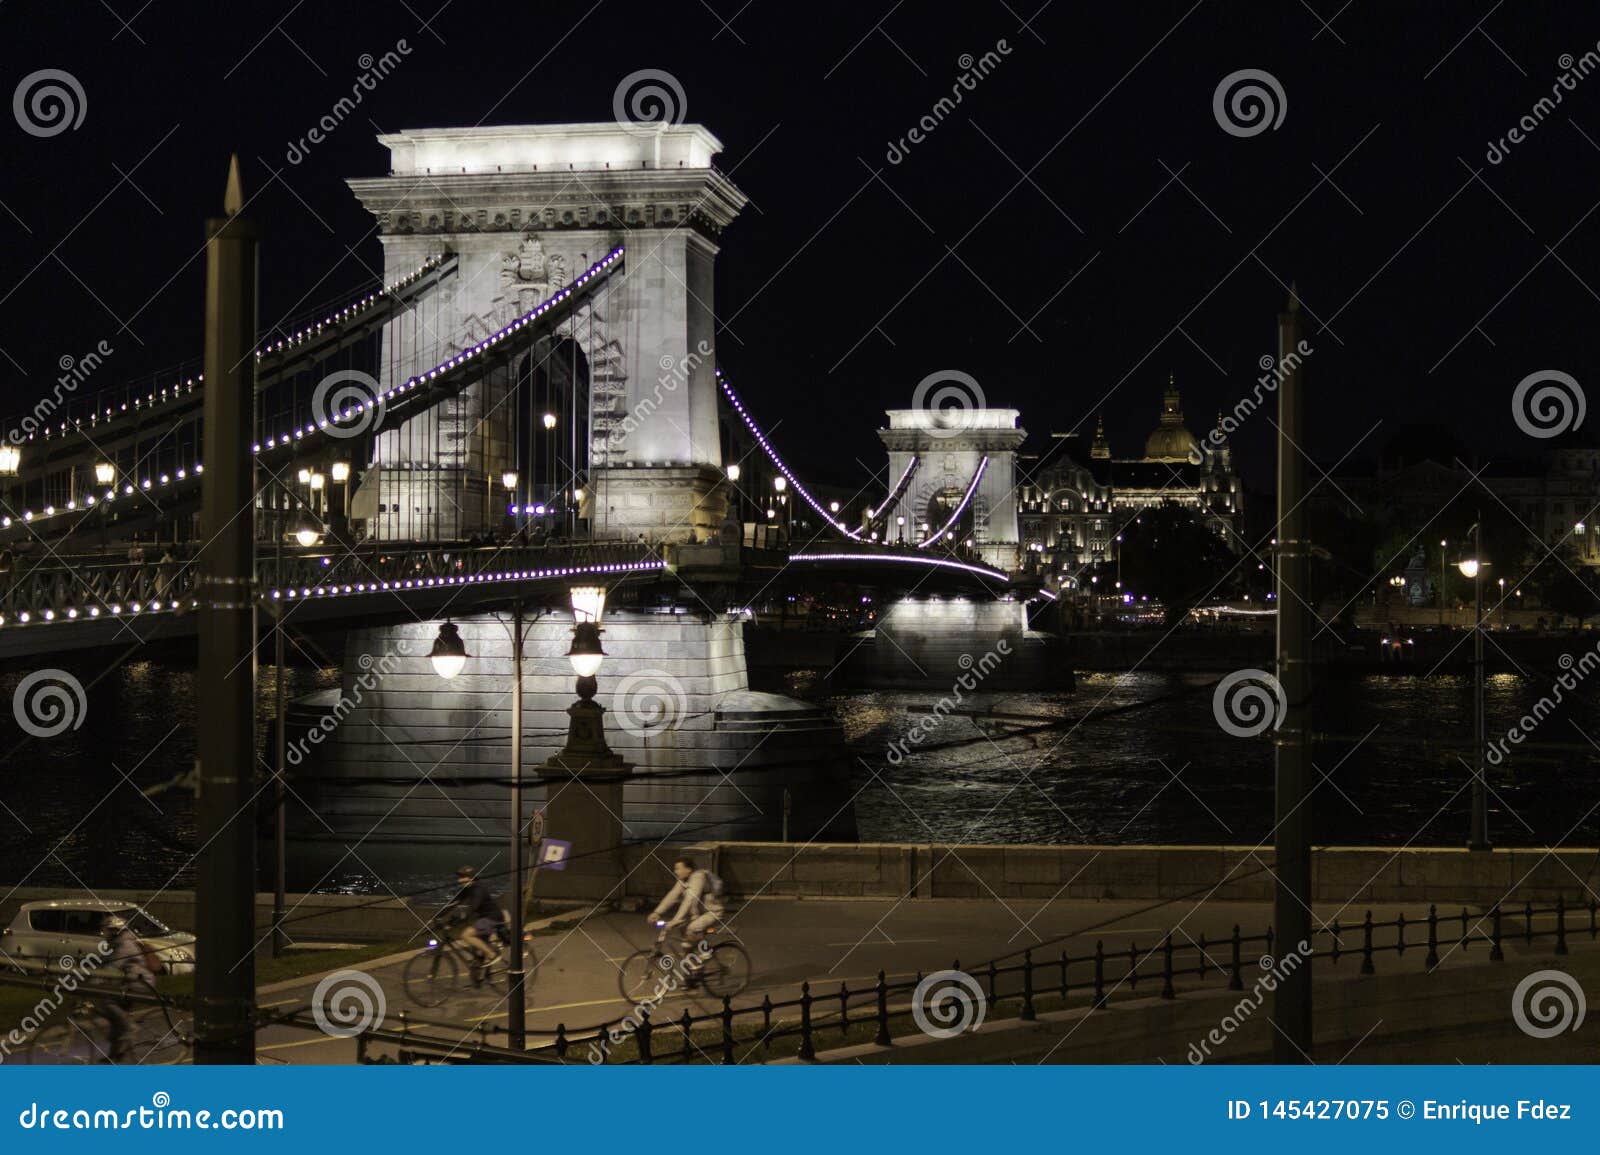 night view of the chain bridge with cyclists walking the streets of budapest, hungary